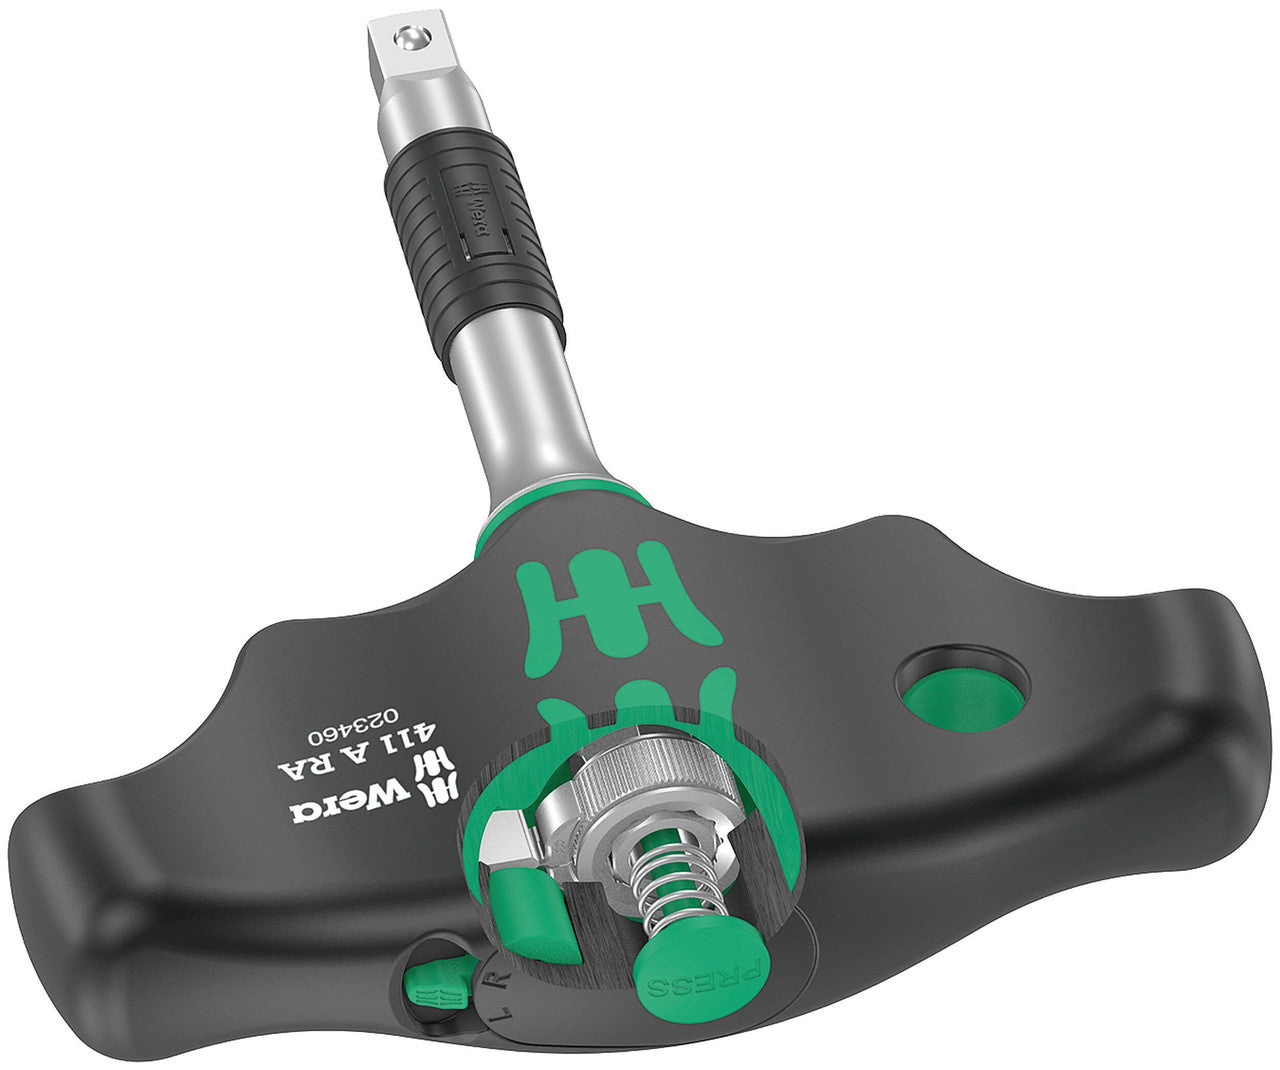 Wera 05023460001 411 A RA T-Handle Adapter Screwdriver with Ratchet, 1/4", 45 mm